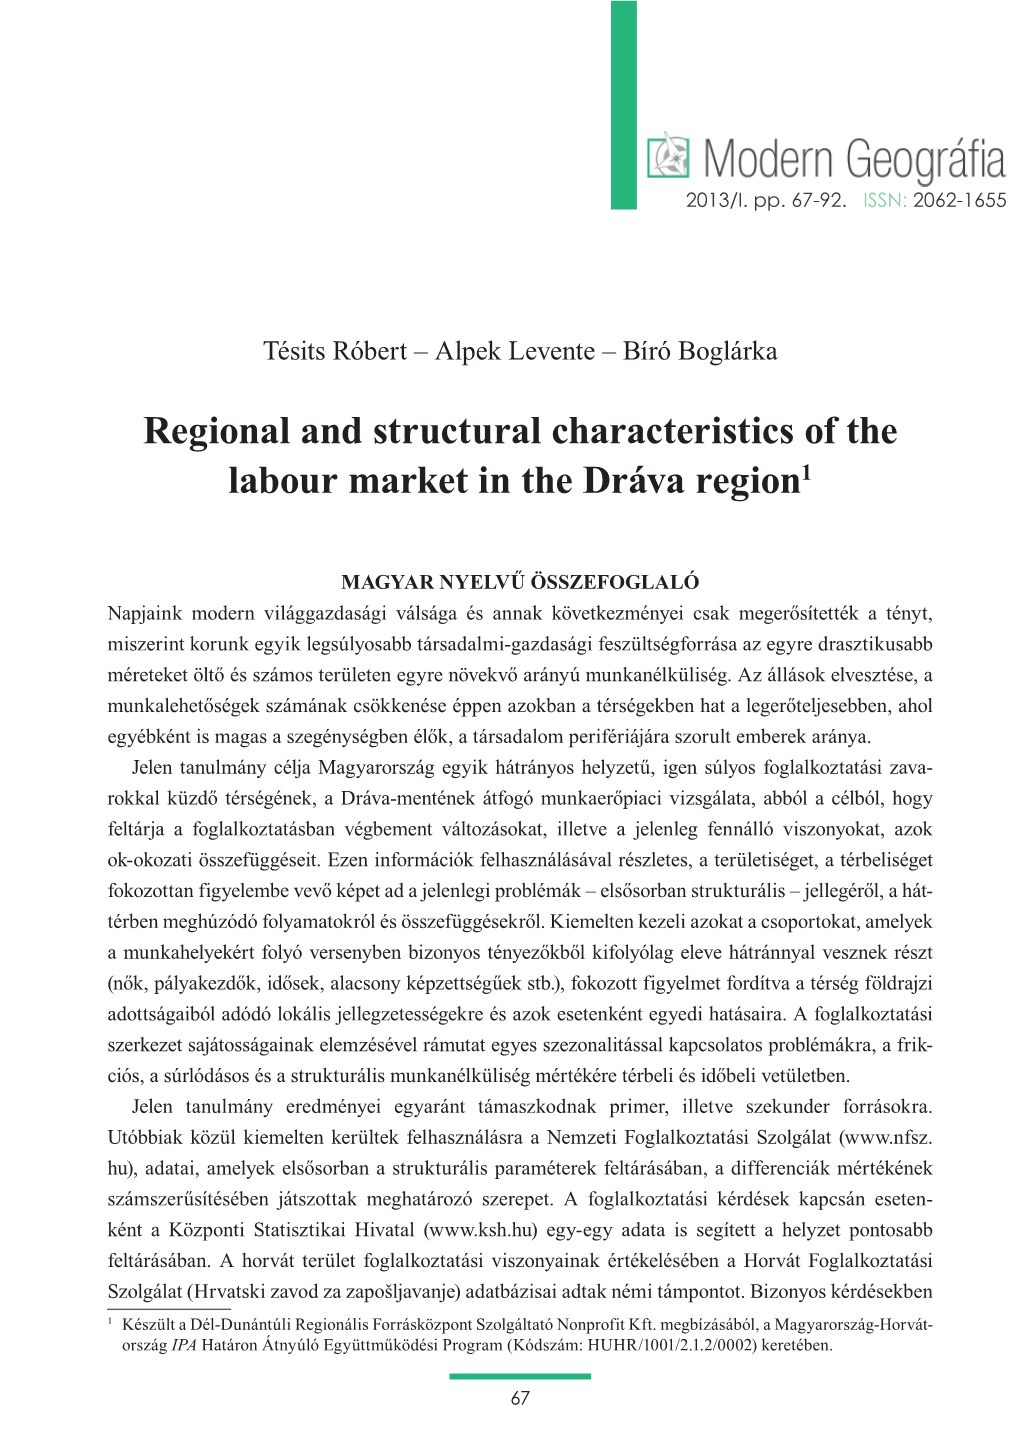 Regional and Structural Characteristics of the Labour Market in the Dráva Region1